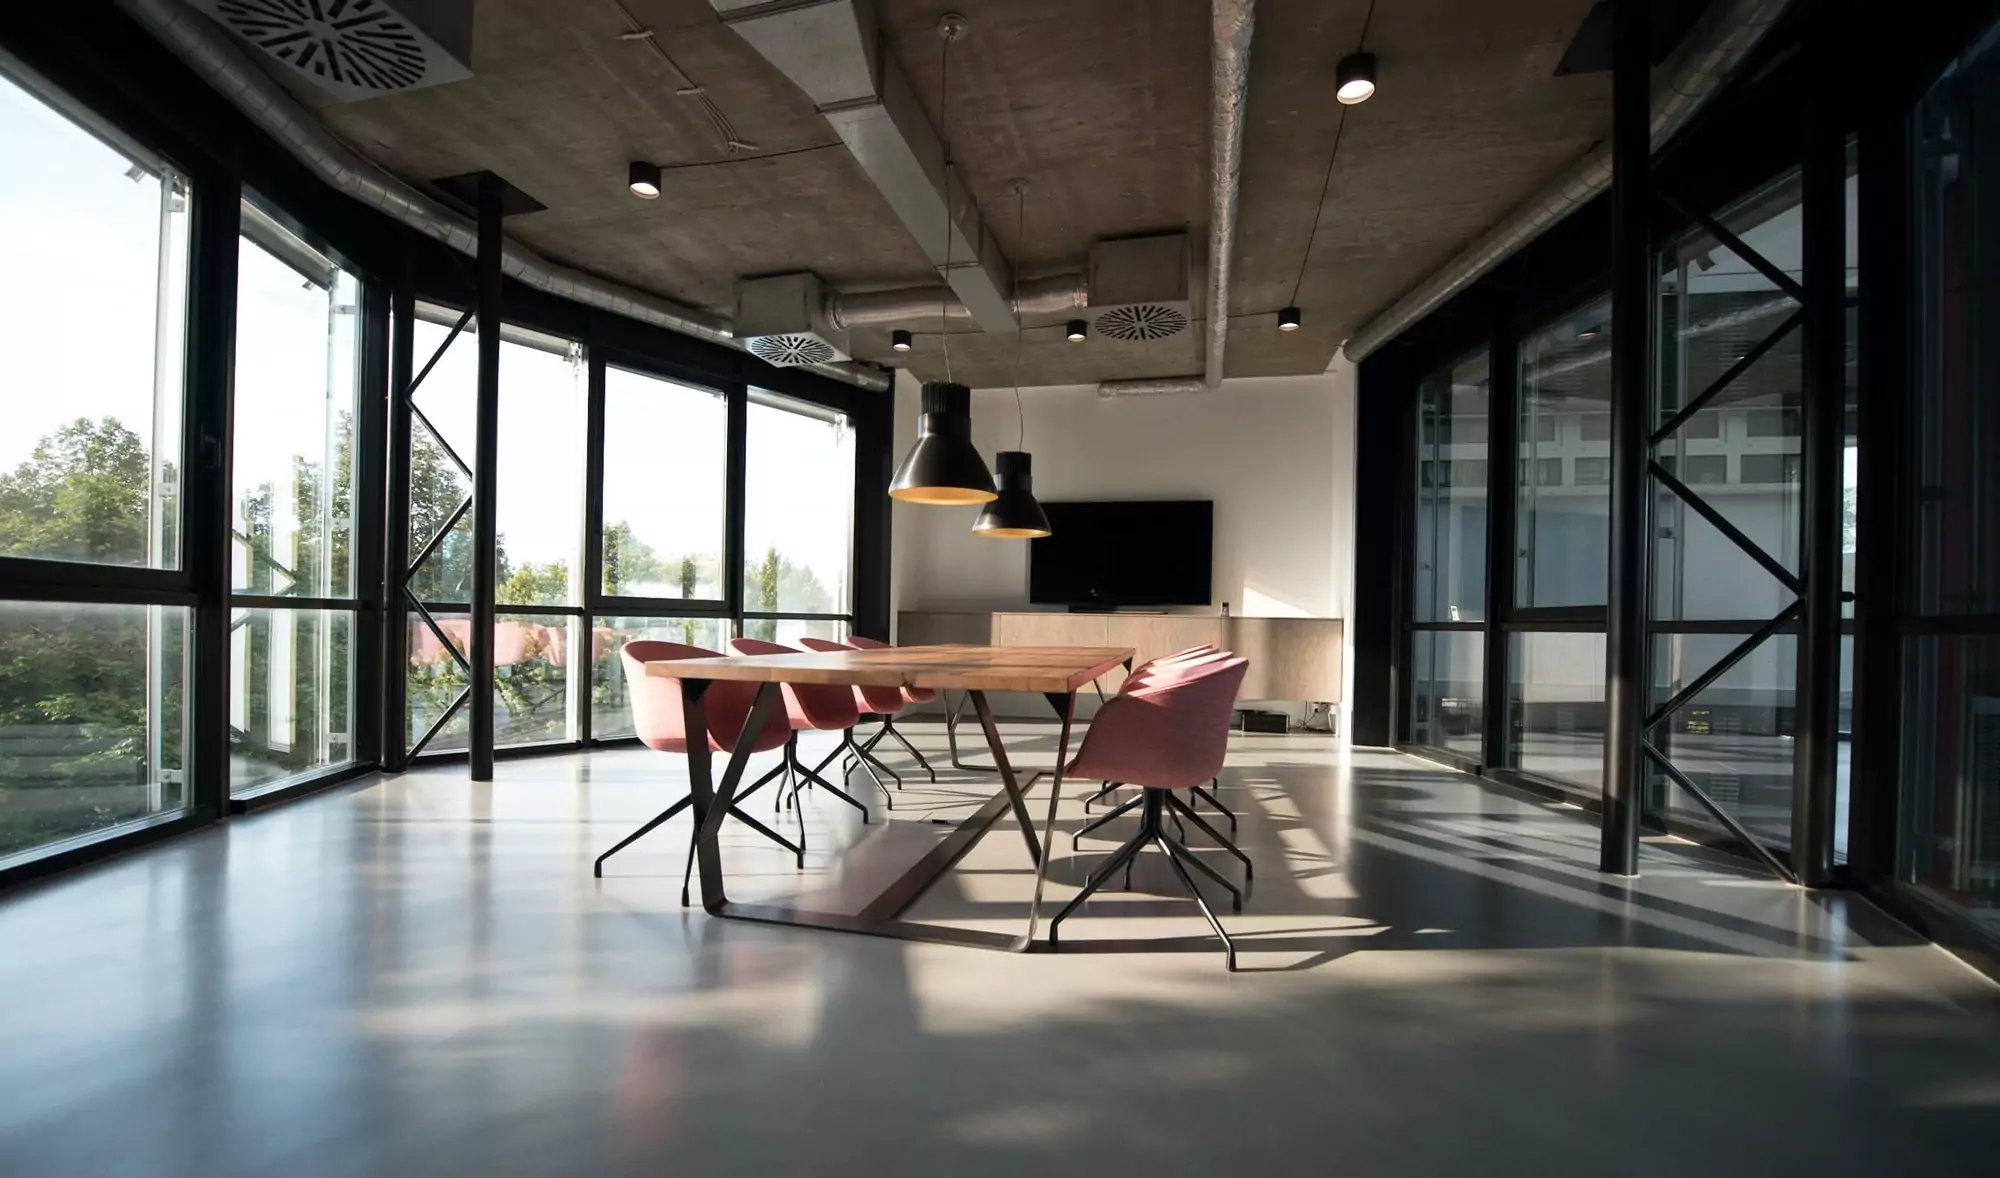 How to design a modern, innovative workplace for productivity and wellbeing